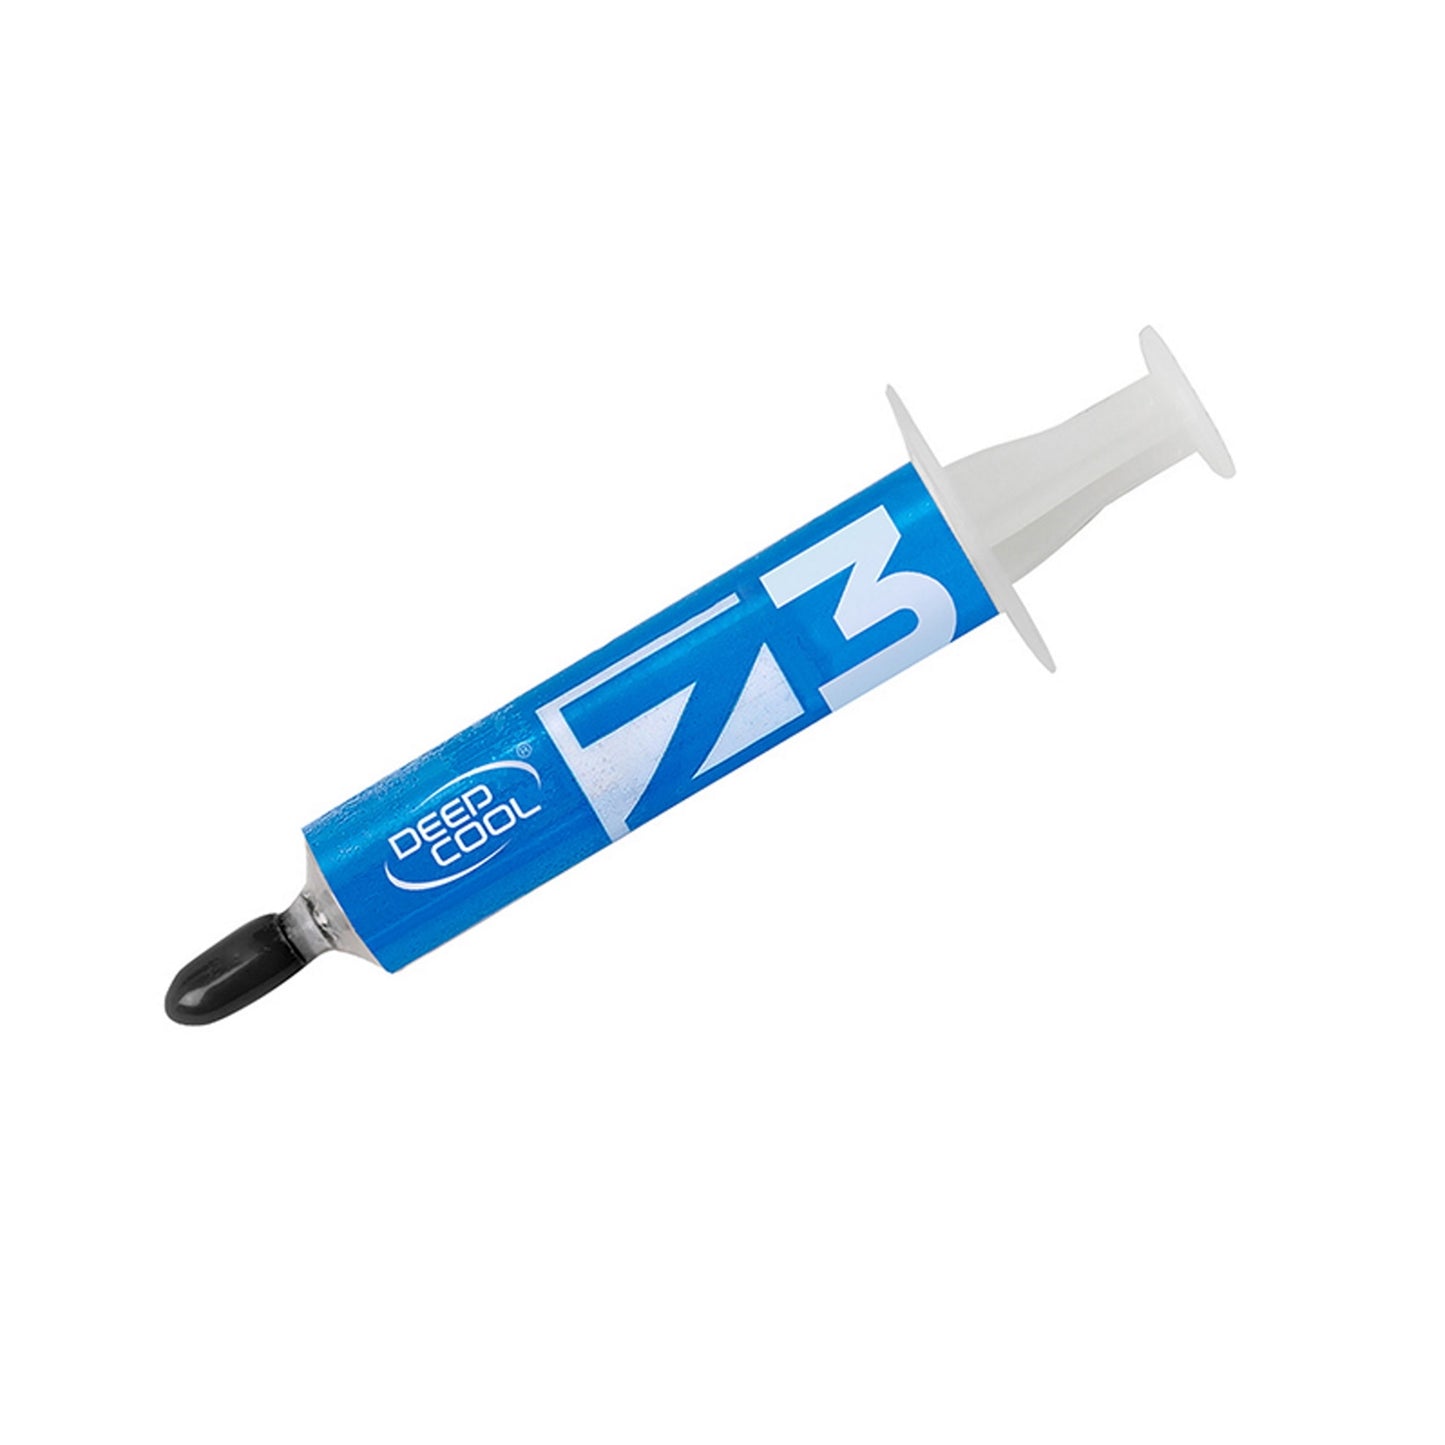 DeepCool Z3 6.5g Thermal Compound Syringe, Silver Grey, High Performance with Excellent Thermal Conductivity, High Compatibility for Most CPU Coolers